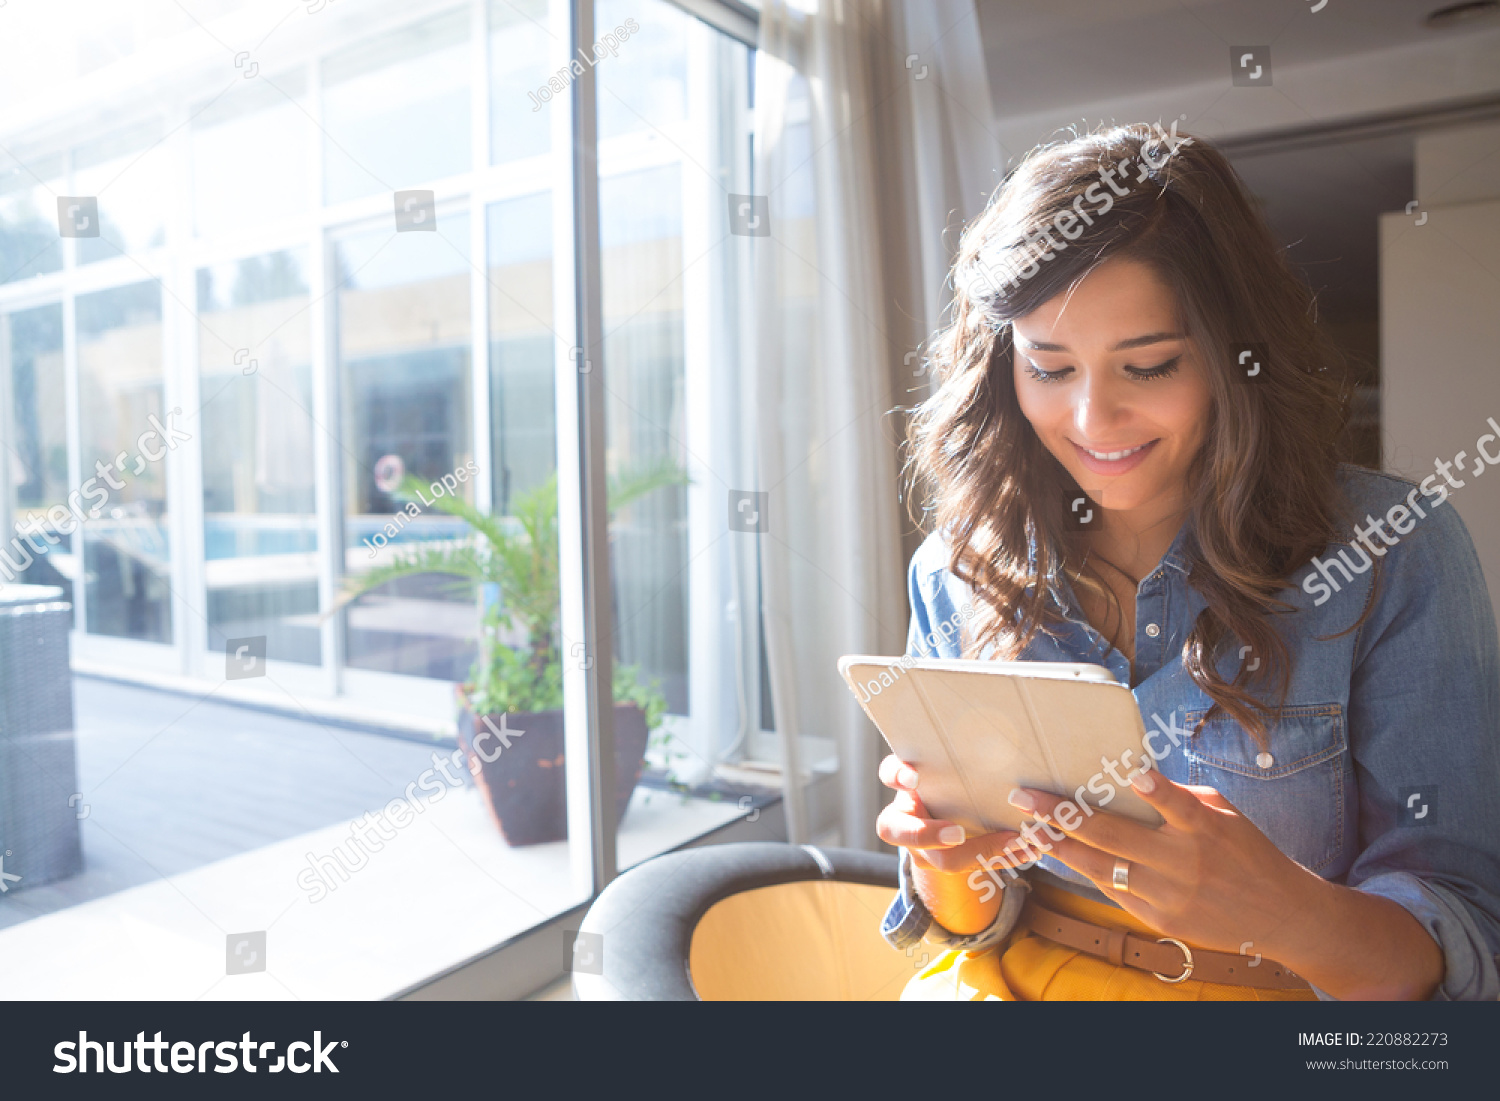 Fashion woman using tablet with sunbeams and lens flare #220882273